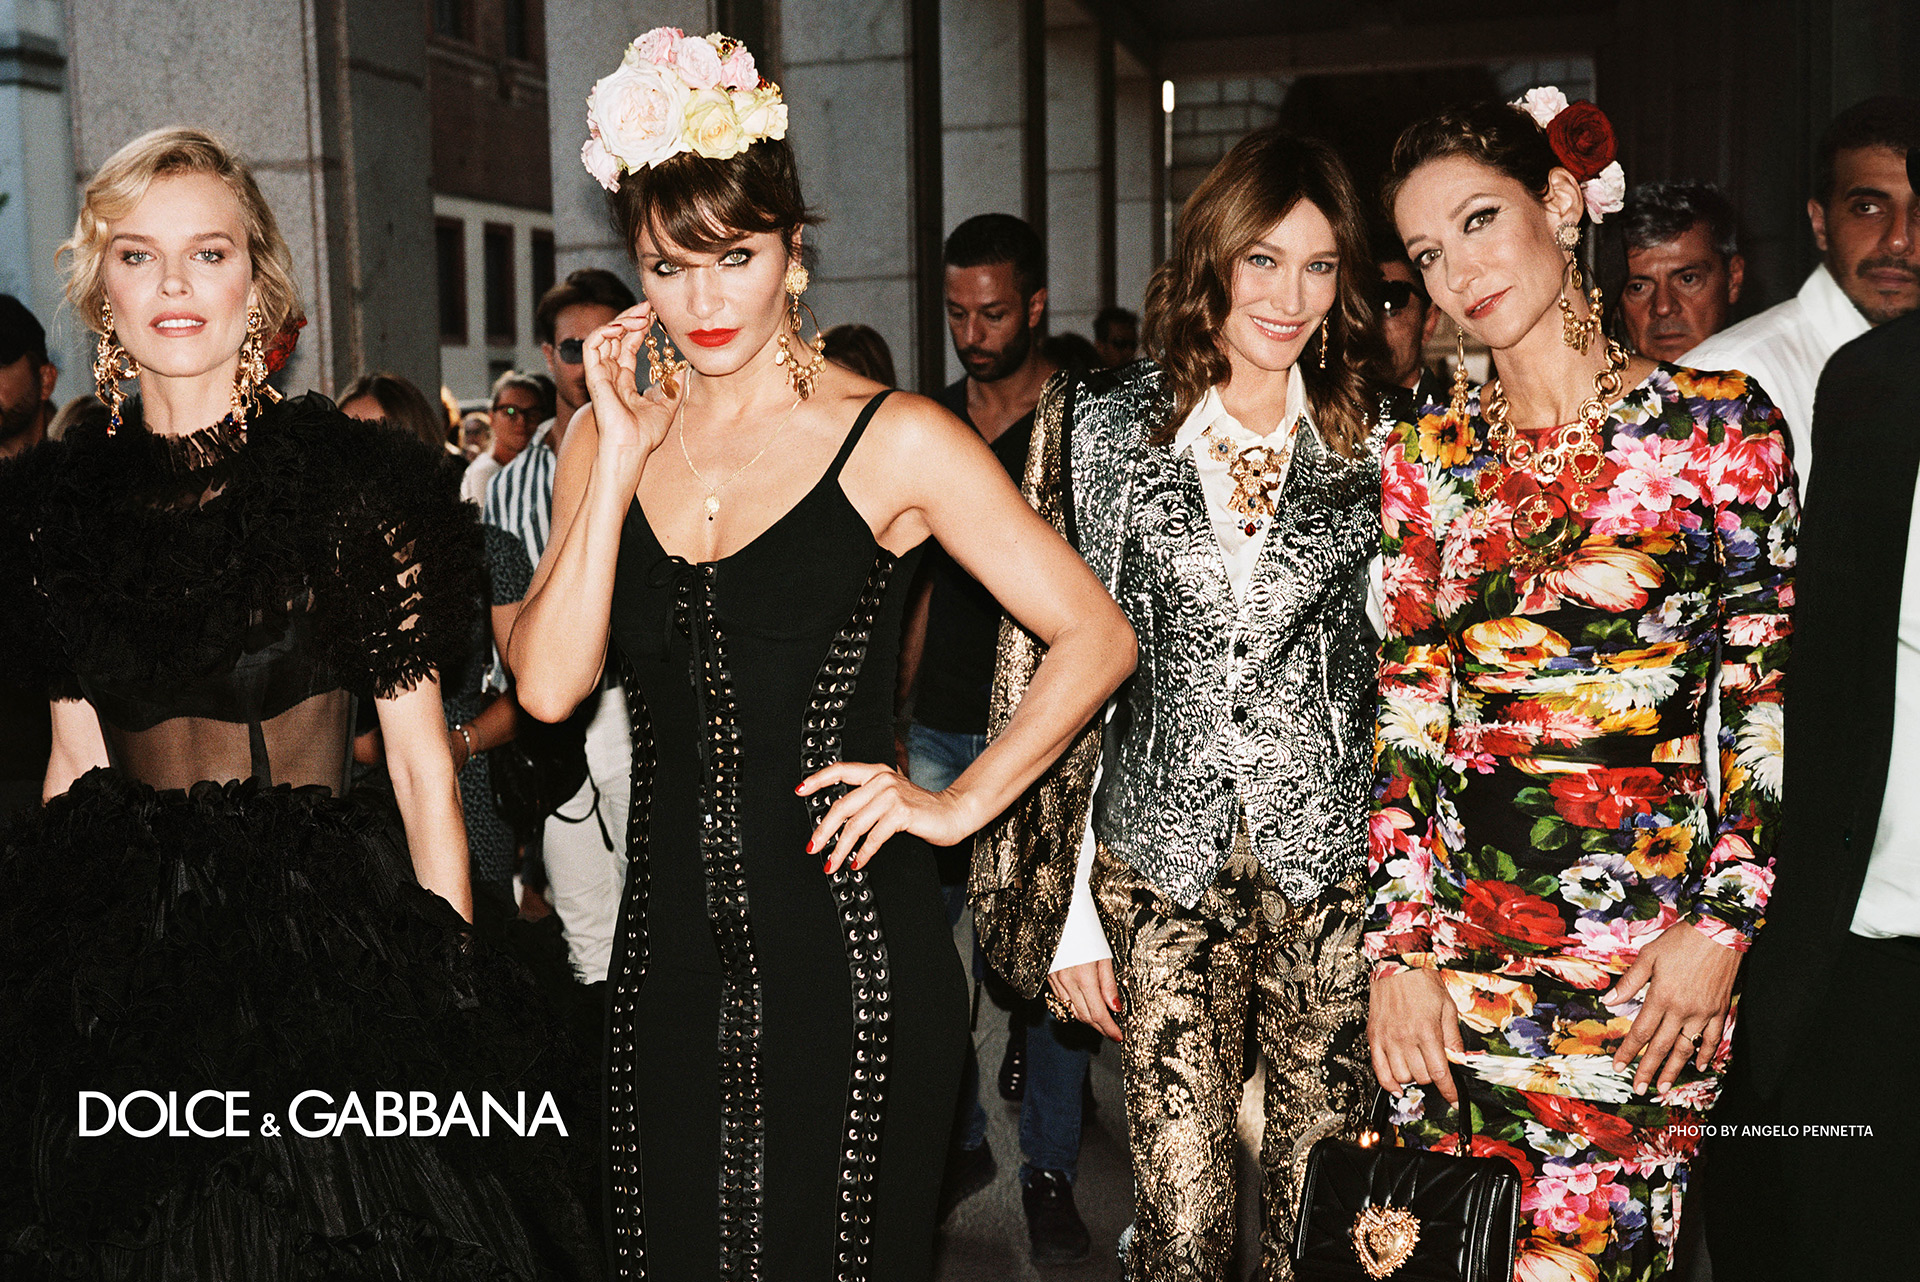 the new dolce and gabbana commercial